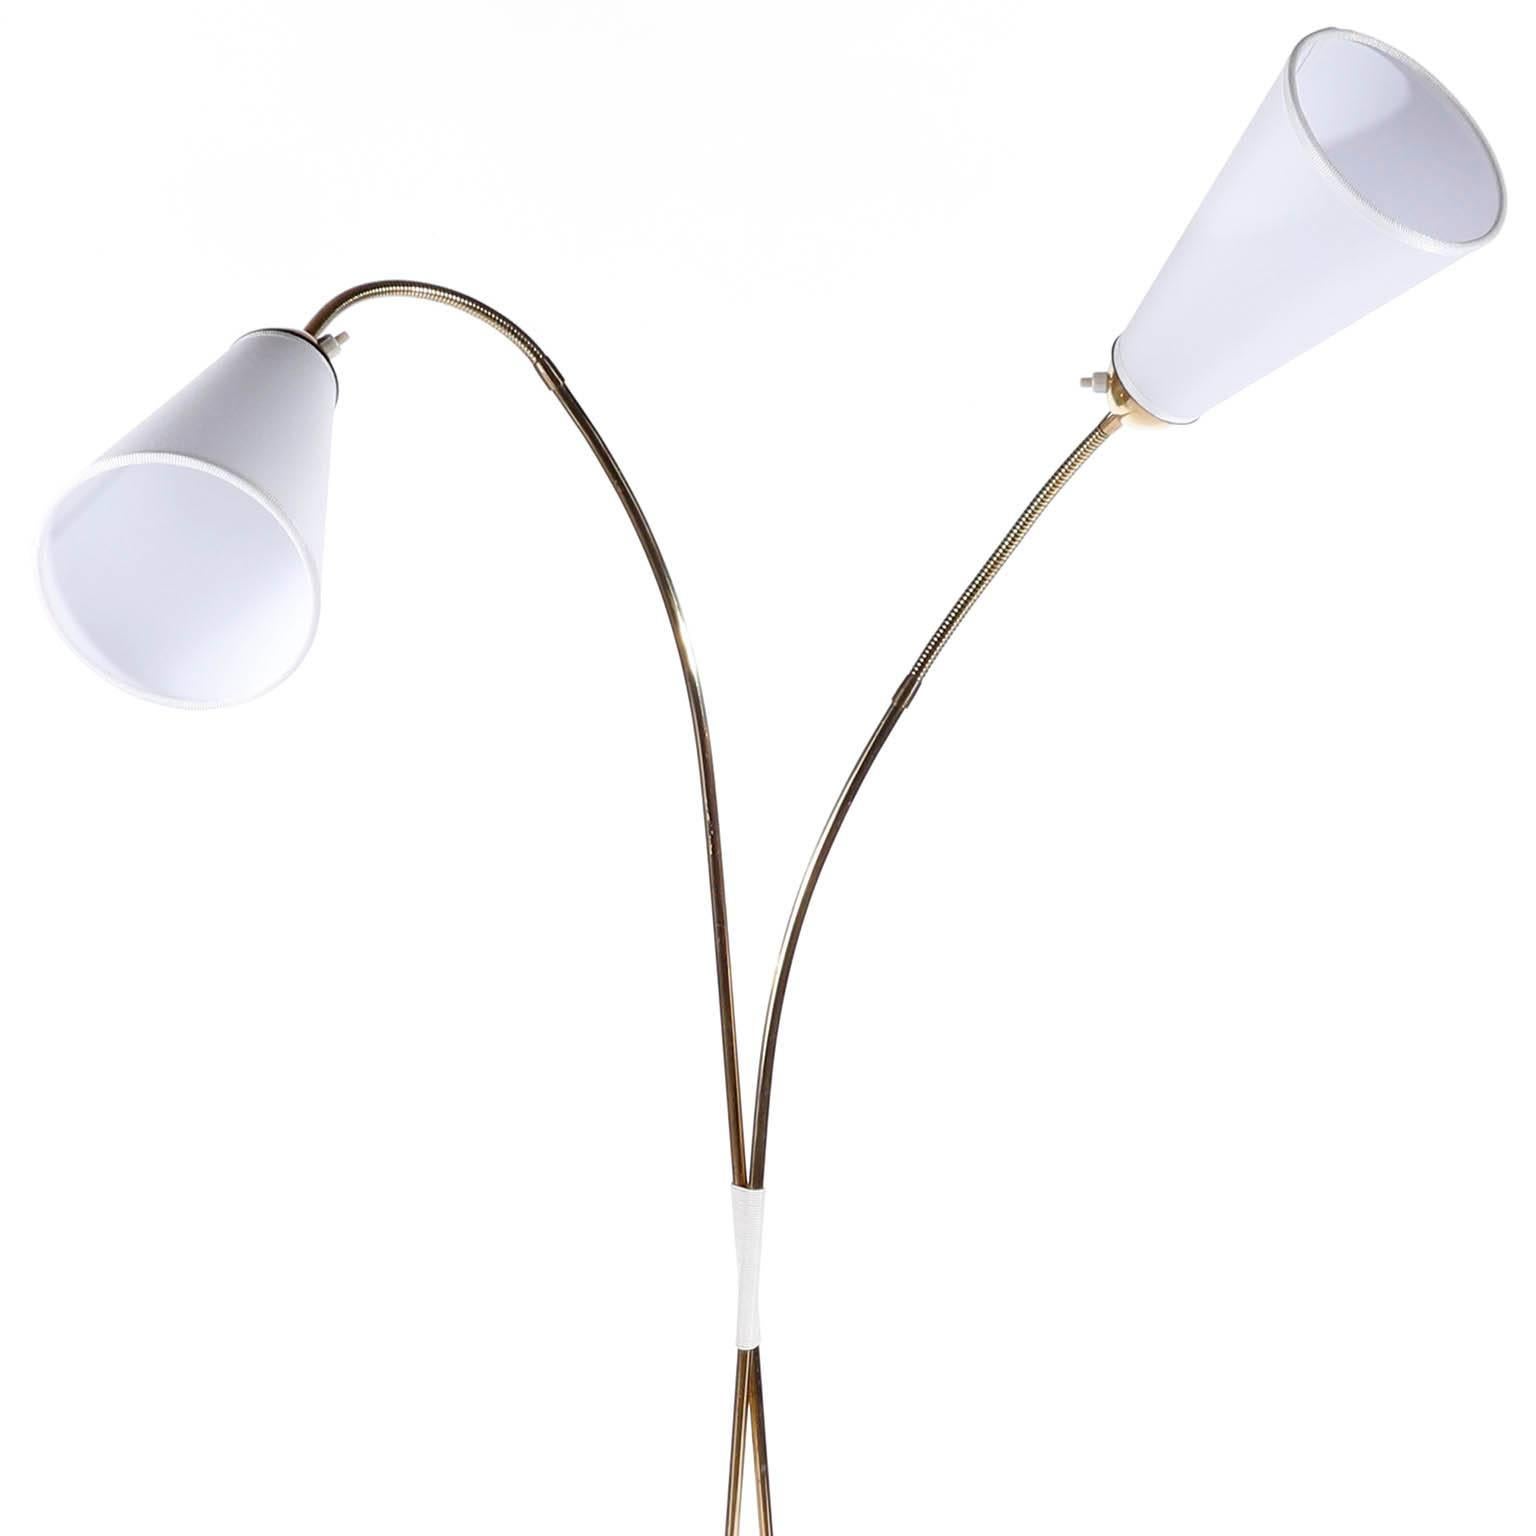 floor lamp with flexible arms